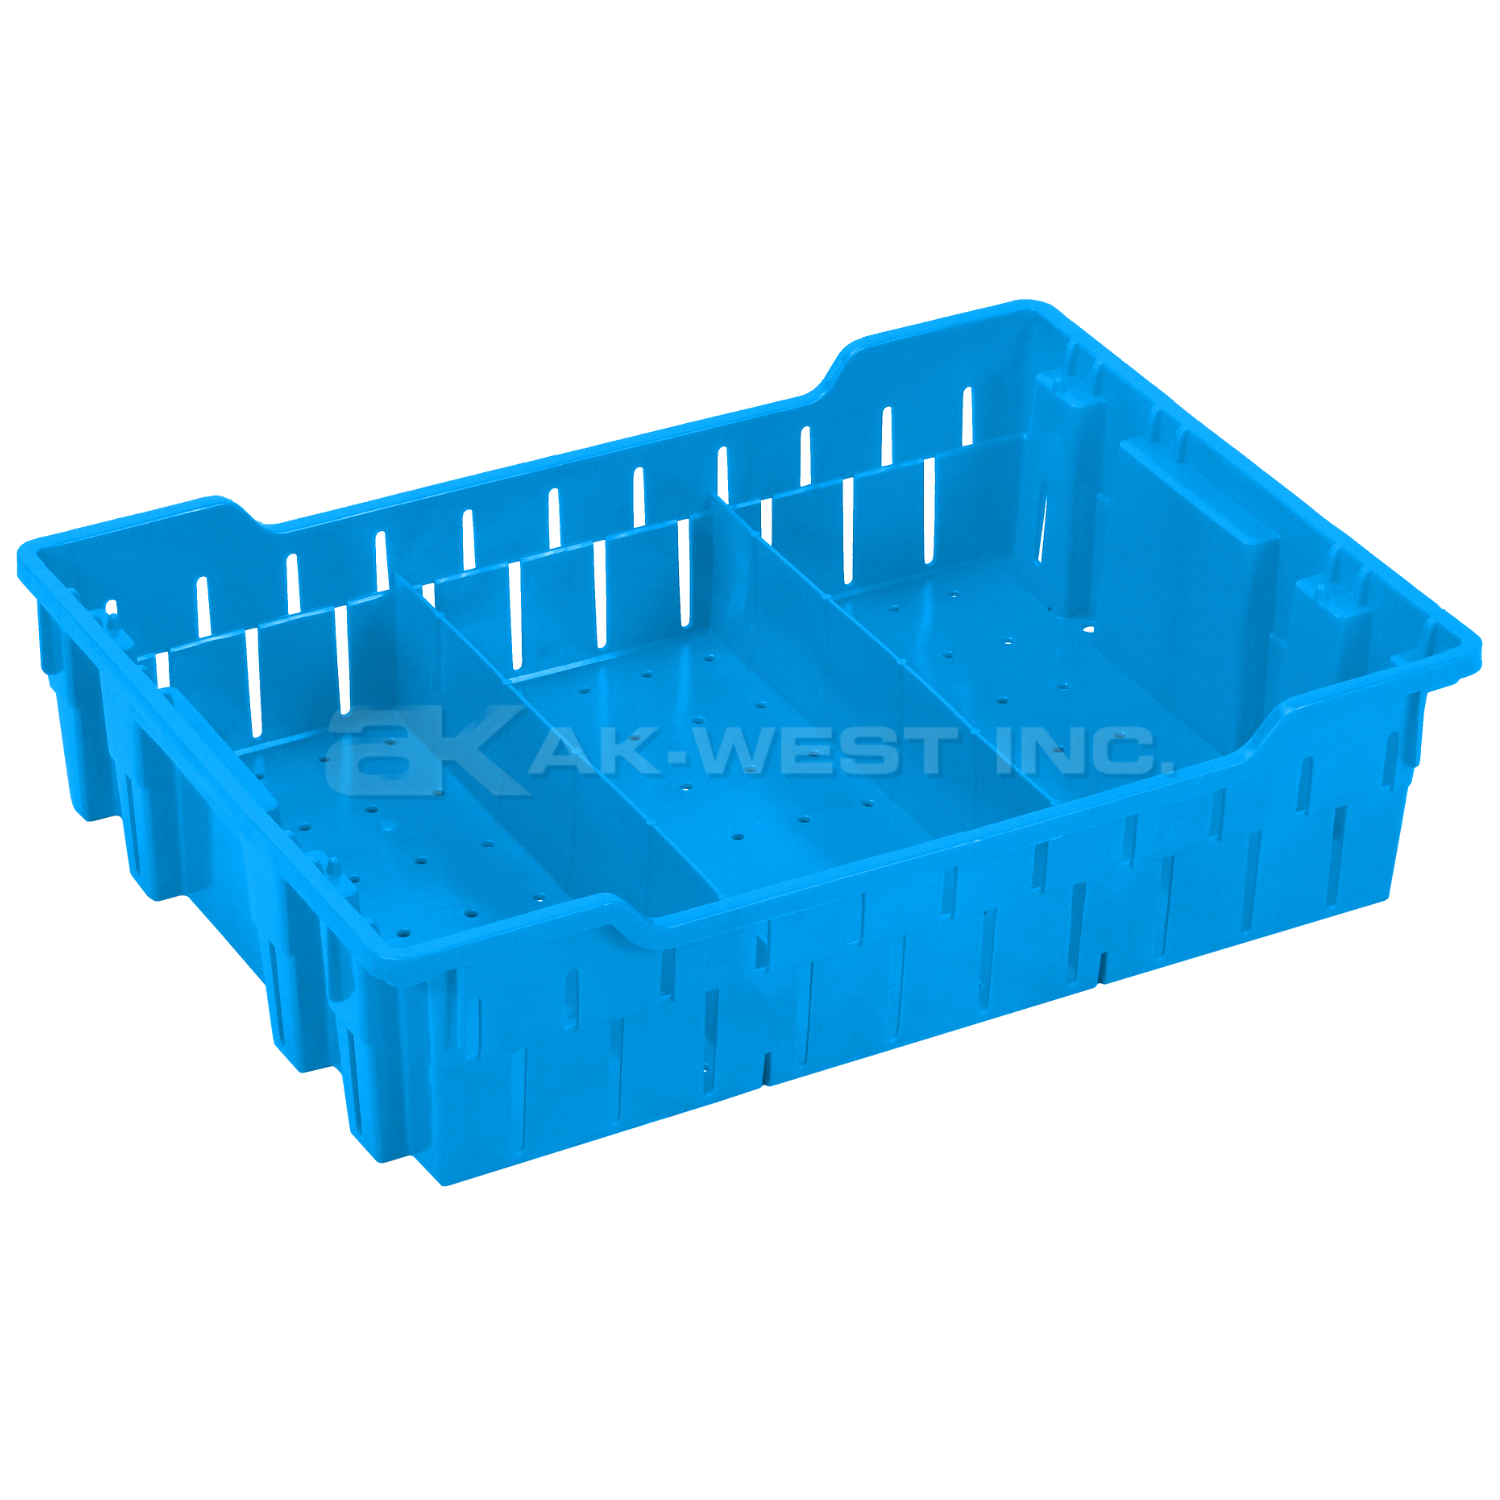 Lt. Blue, 19"L x 13"W x 5"H Stack and Nest Container w/ Vented Sides and Base w/ Dividers